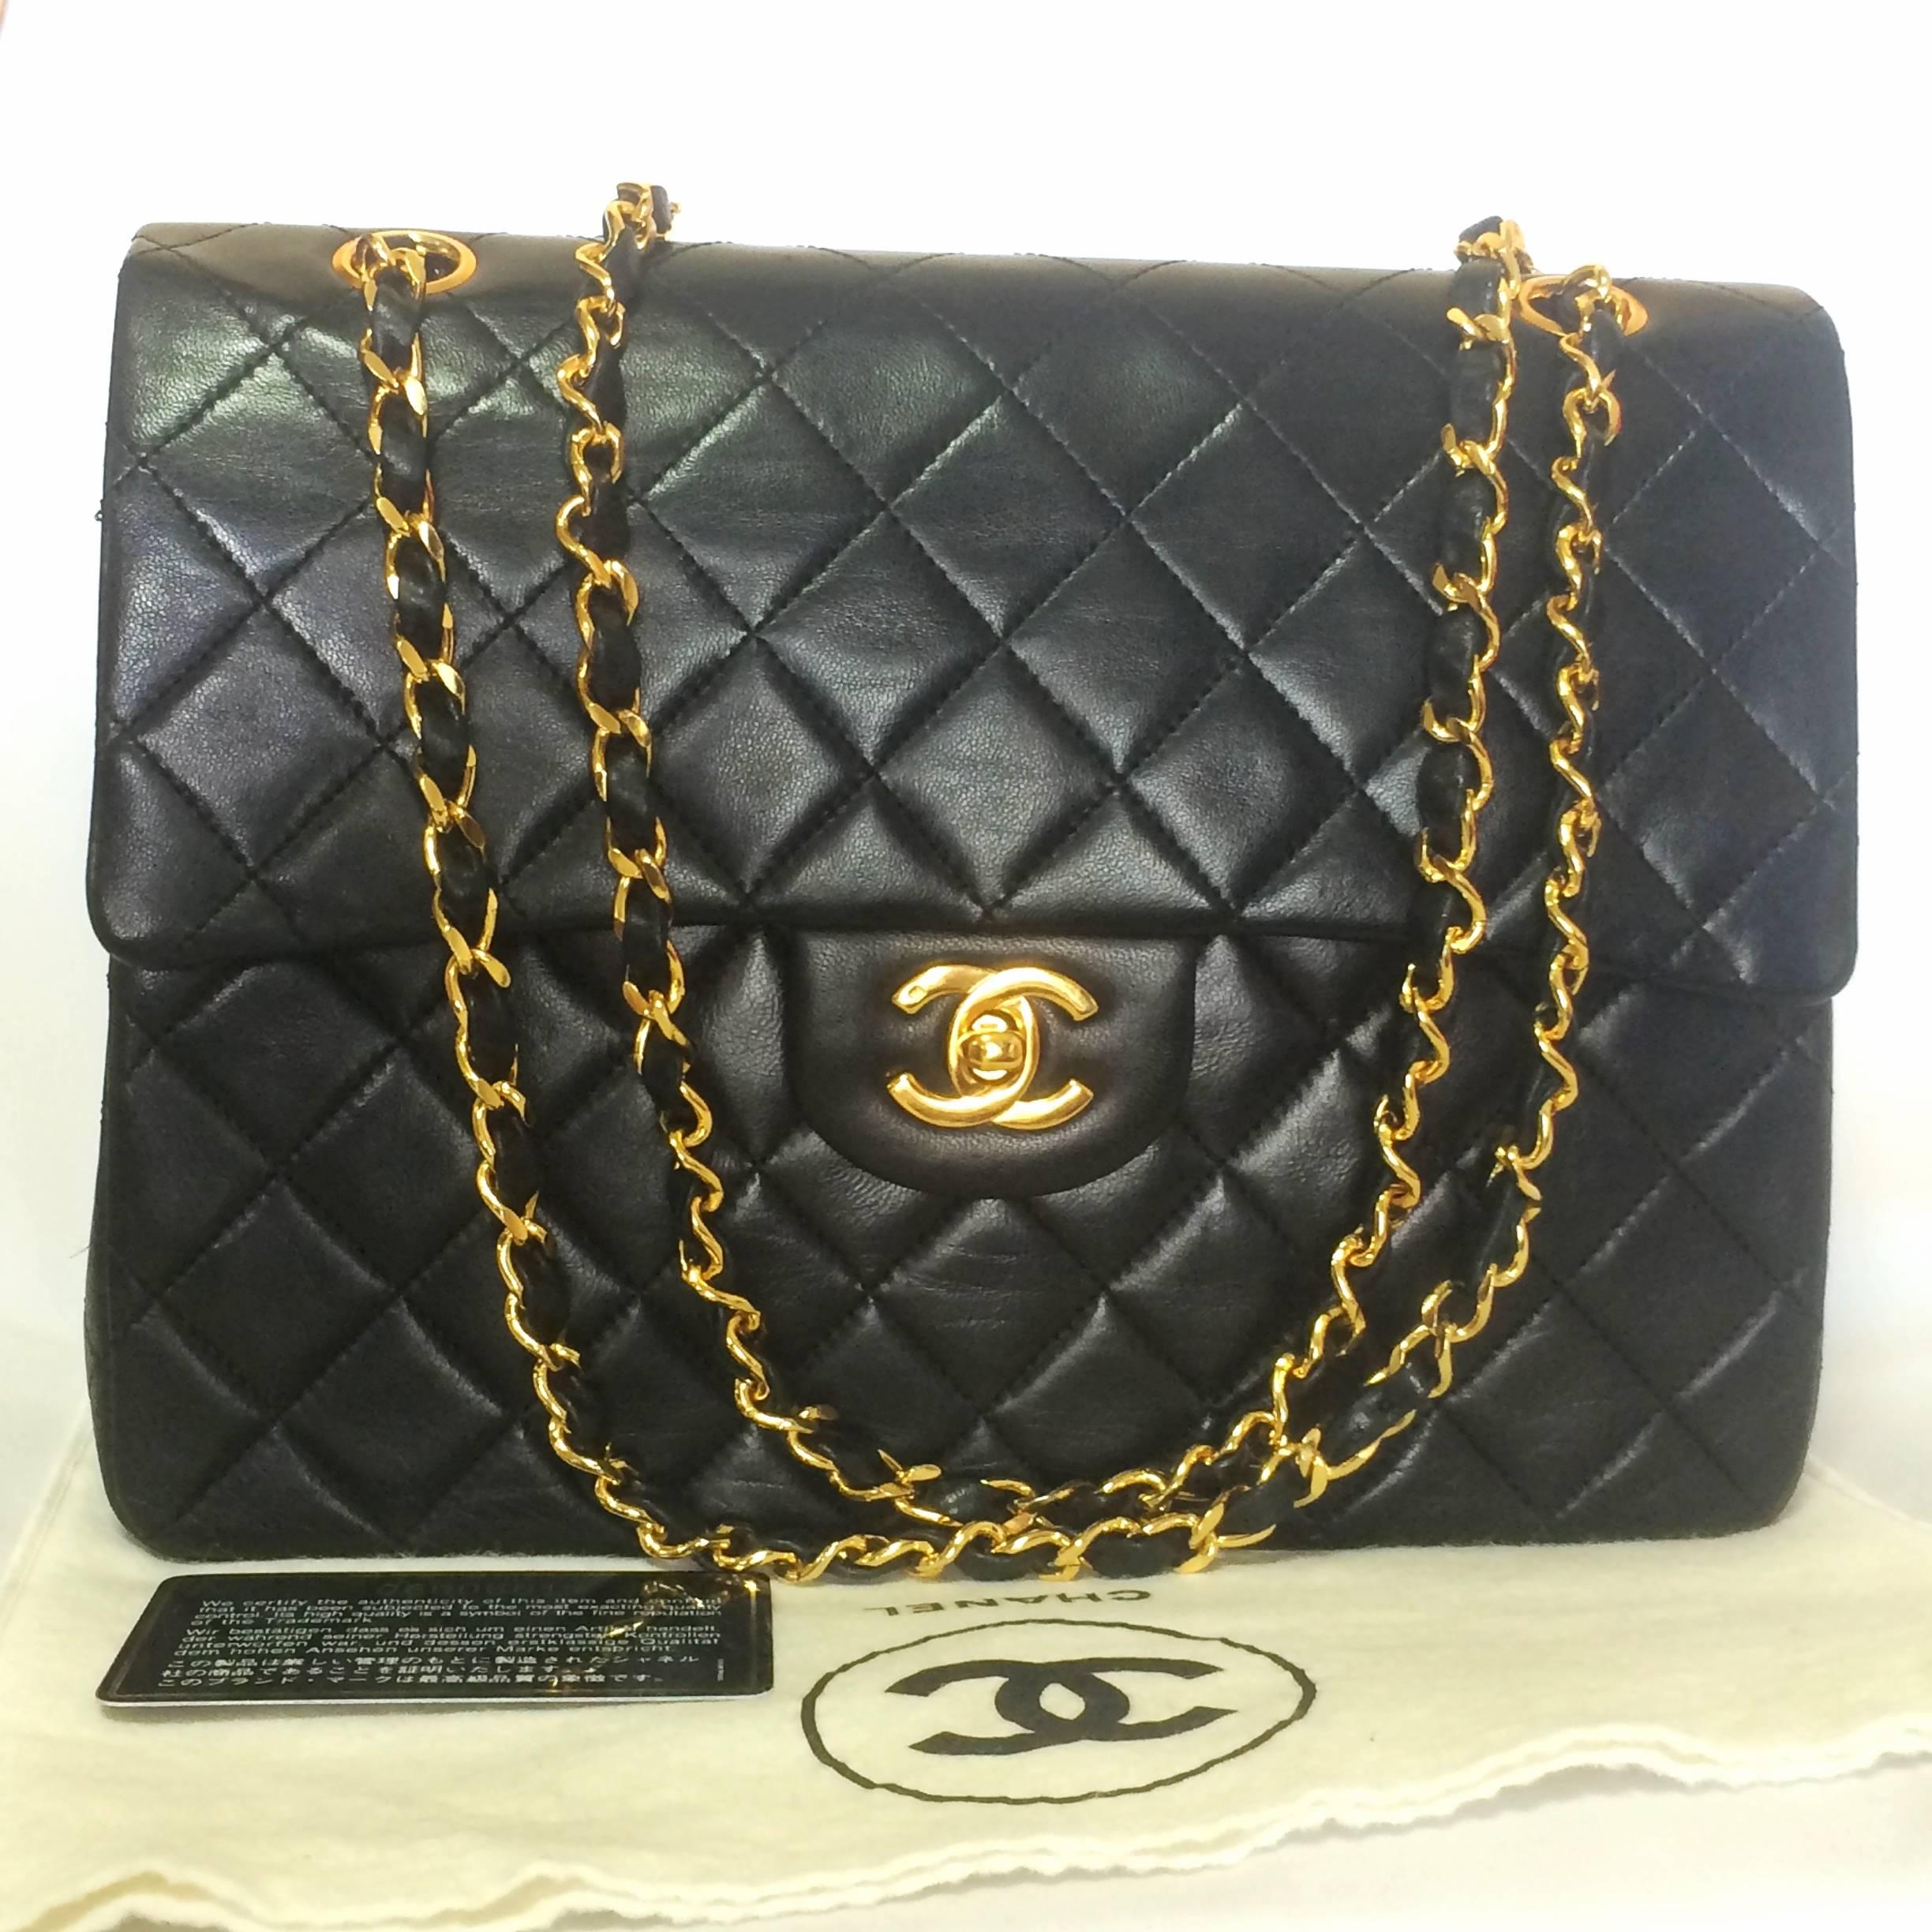 1980s. Vintage CHANEL black lambskin classic 2.55 double flap shoulder purse with gold tone chain straps. 
The very best classic CHANEL purse for the rest of your life....

Introducing another vintage piece, a classic black lamb leather 2.55